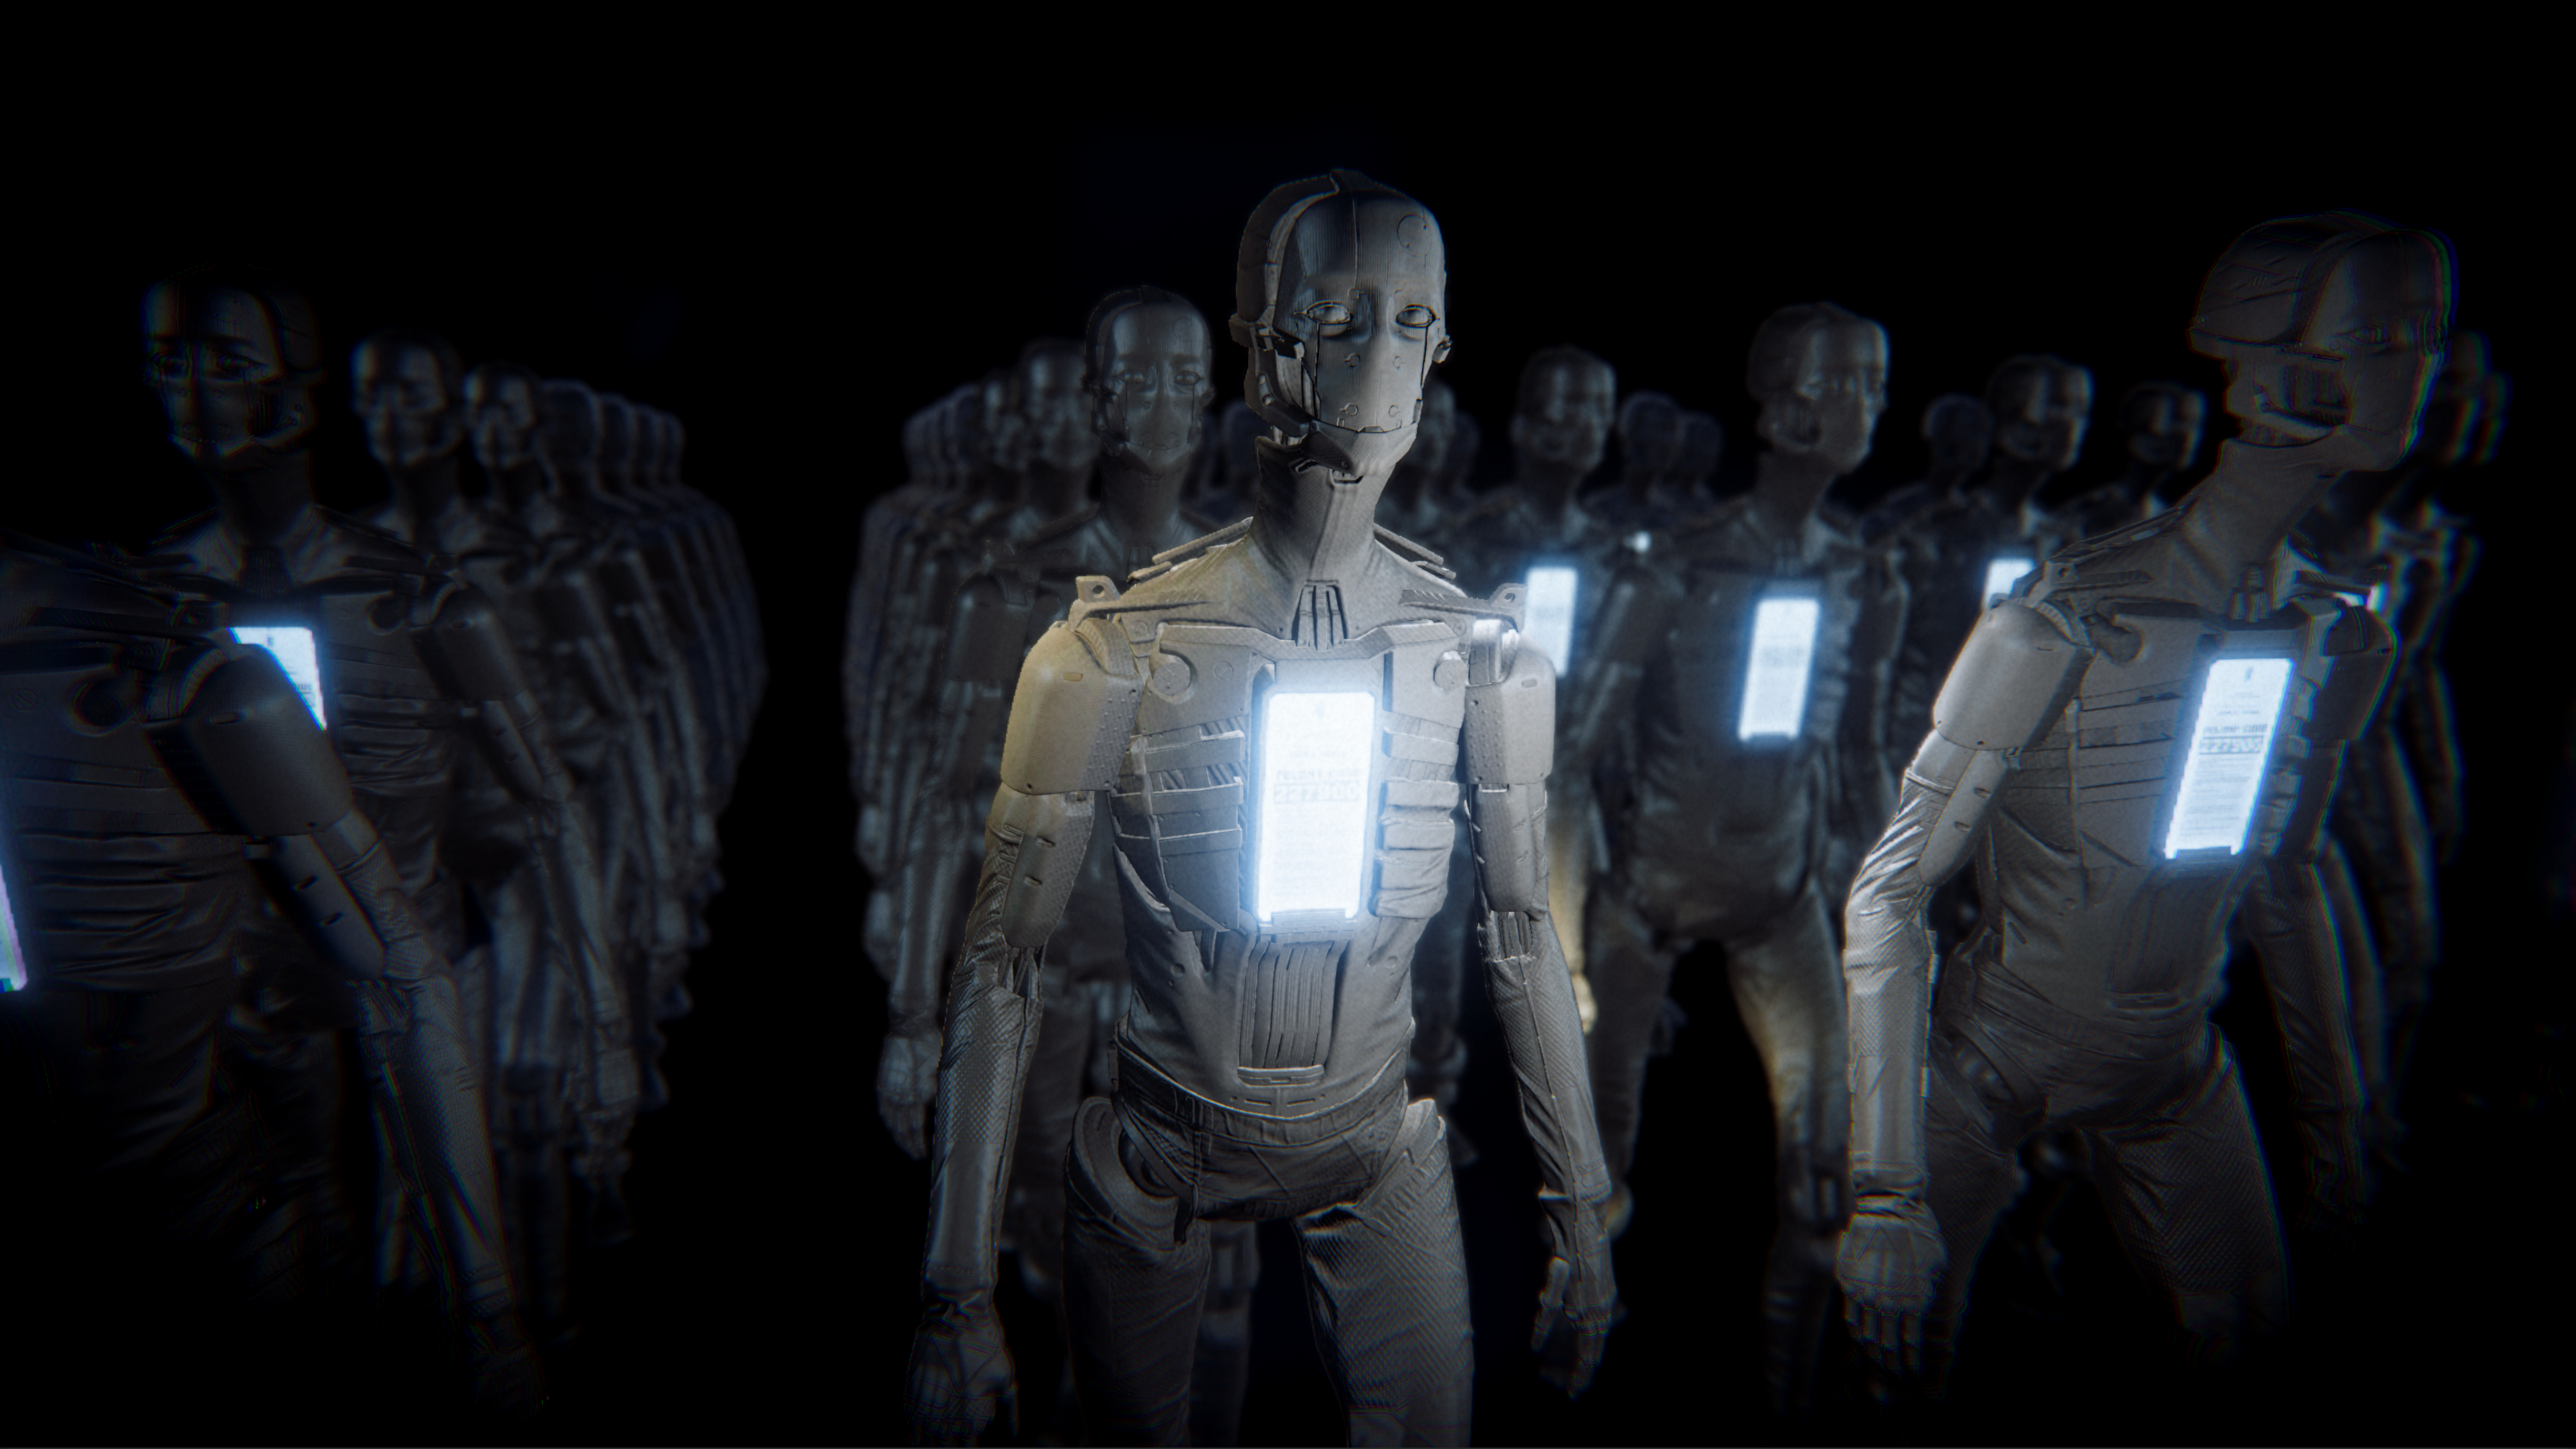 The demo takes advantage of GPU (Compute) Skinning to mesh the skin of these robots to the skeleton underneath, while maintaining a relatively high framerate